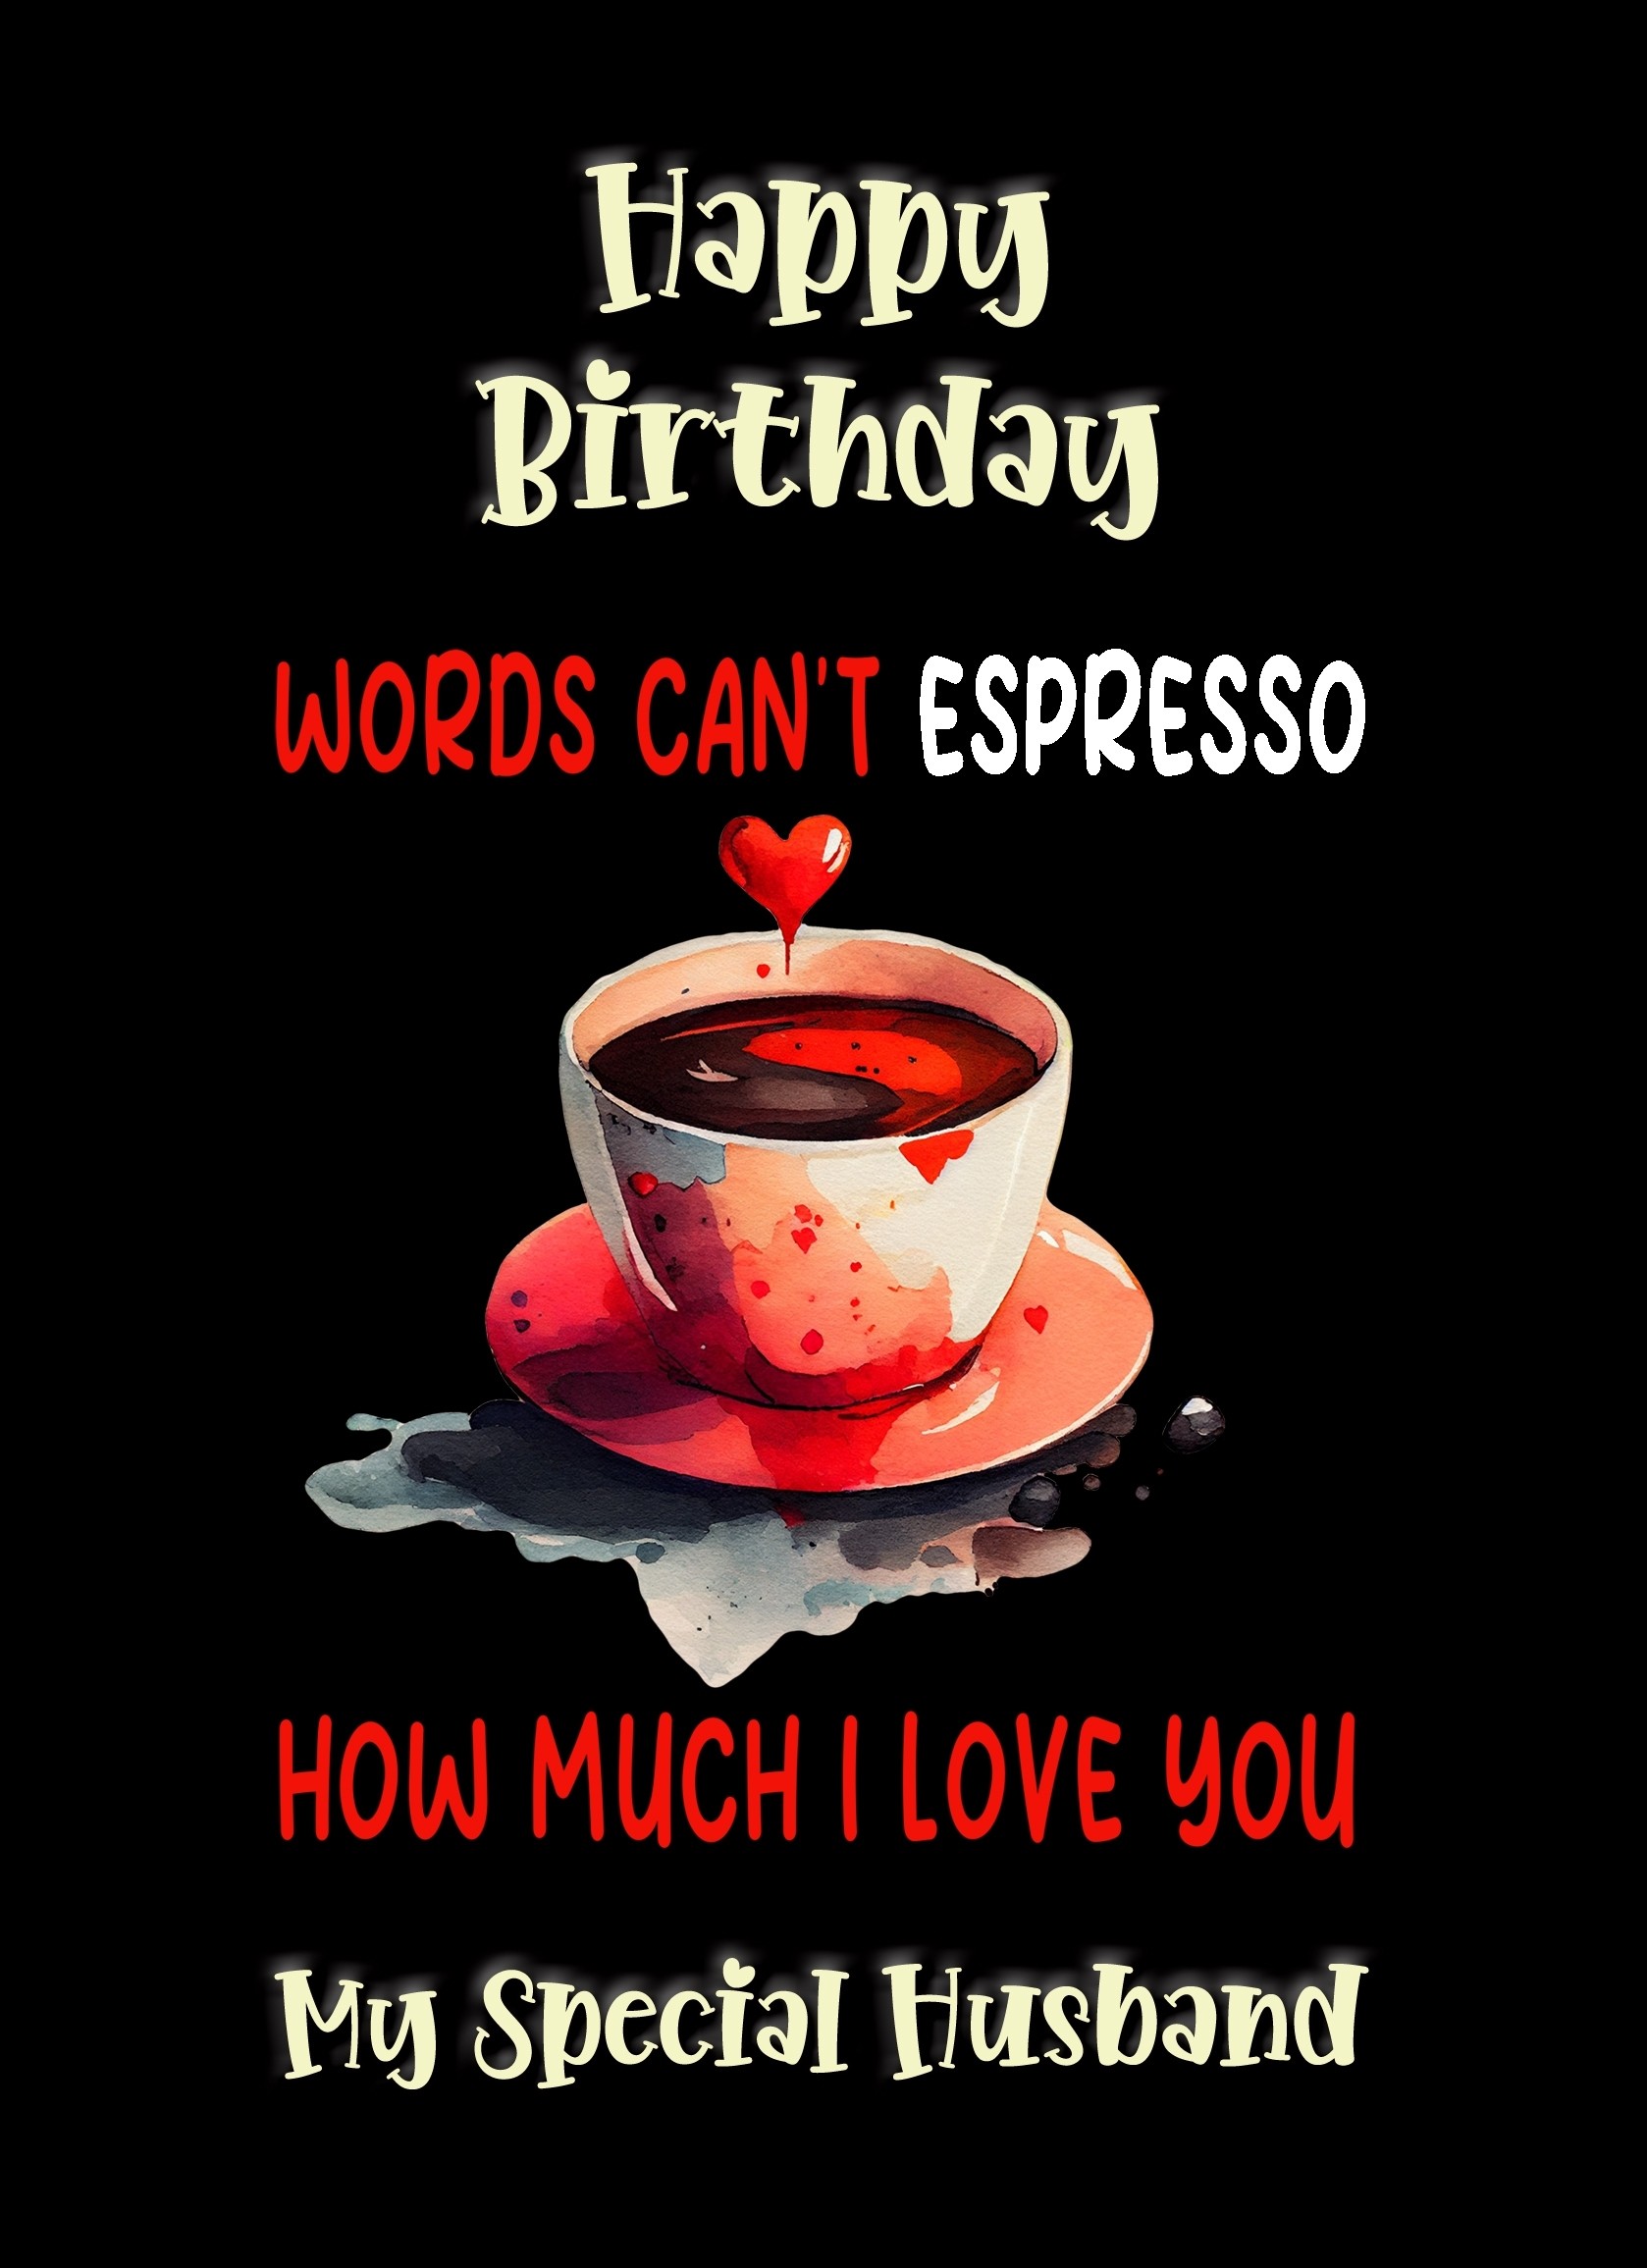 Funny Pun Romantic Birthday Card for Husband (Can't Espresso)